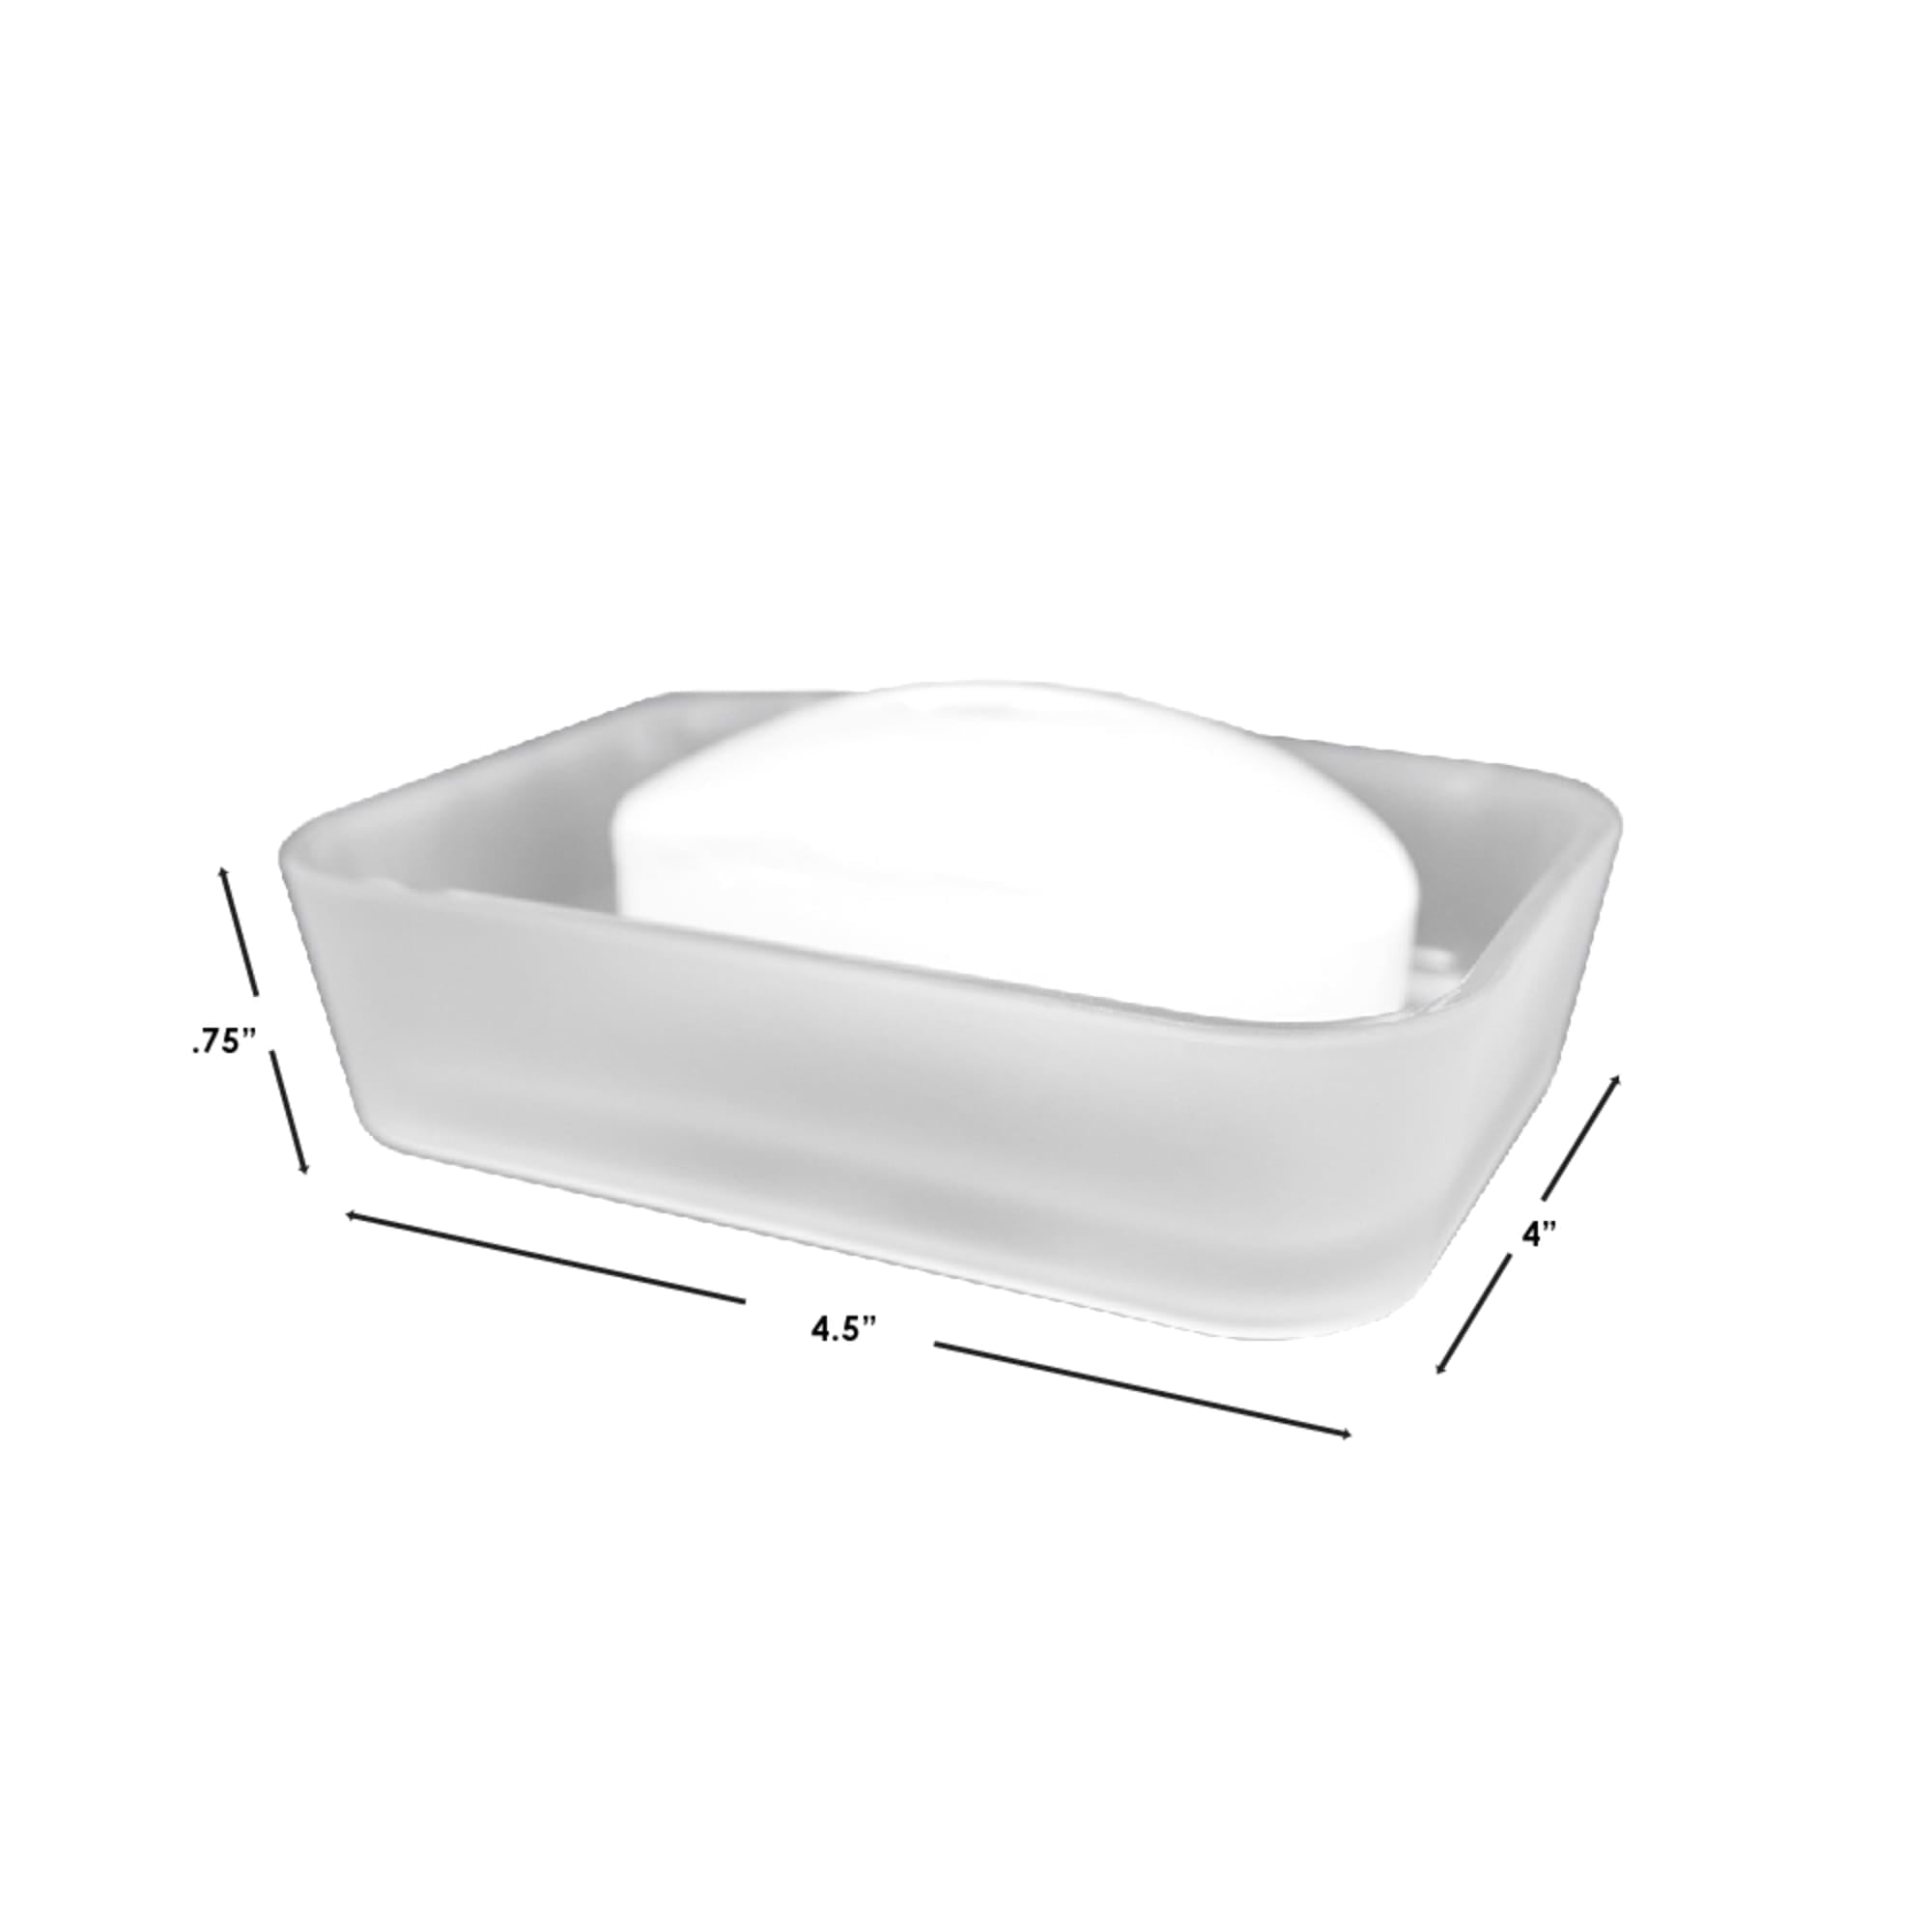 Home Basics Frosted Rubberized Plastic Soap Dish $2.50 EACH, CASE PACK OF 12